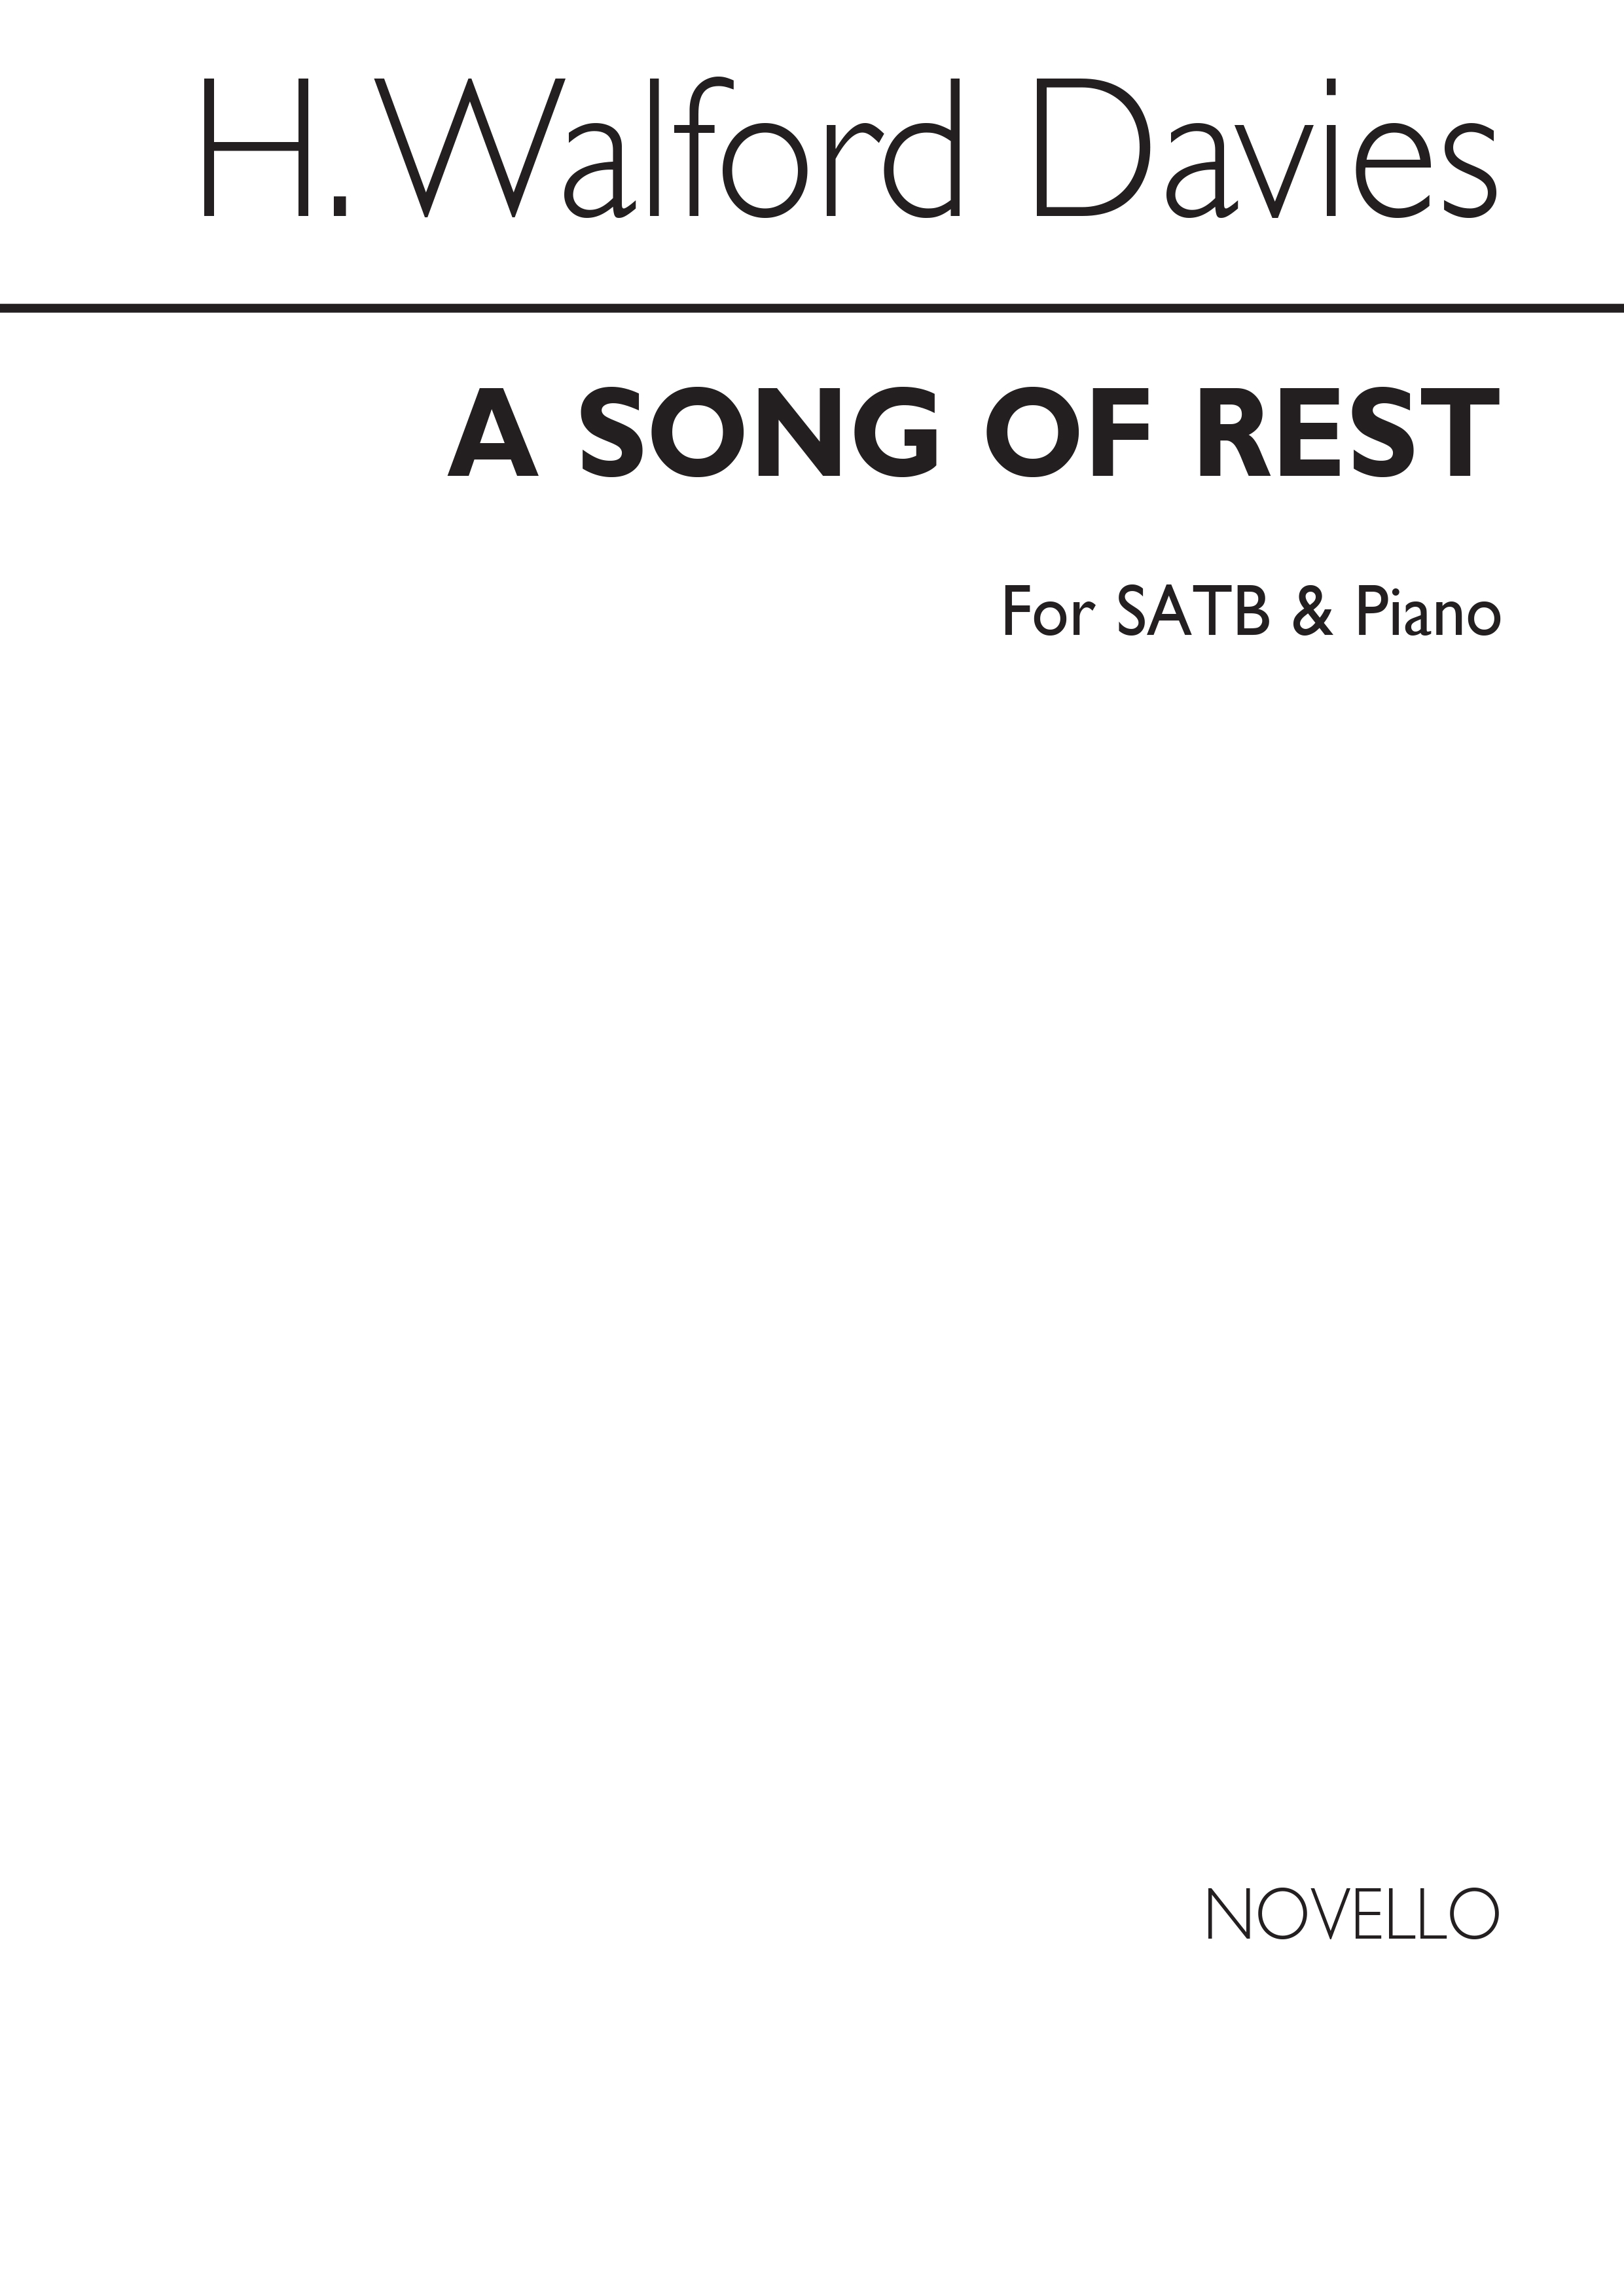 Walford-davies A Song Of Rest Satb/Piano